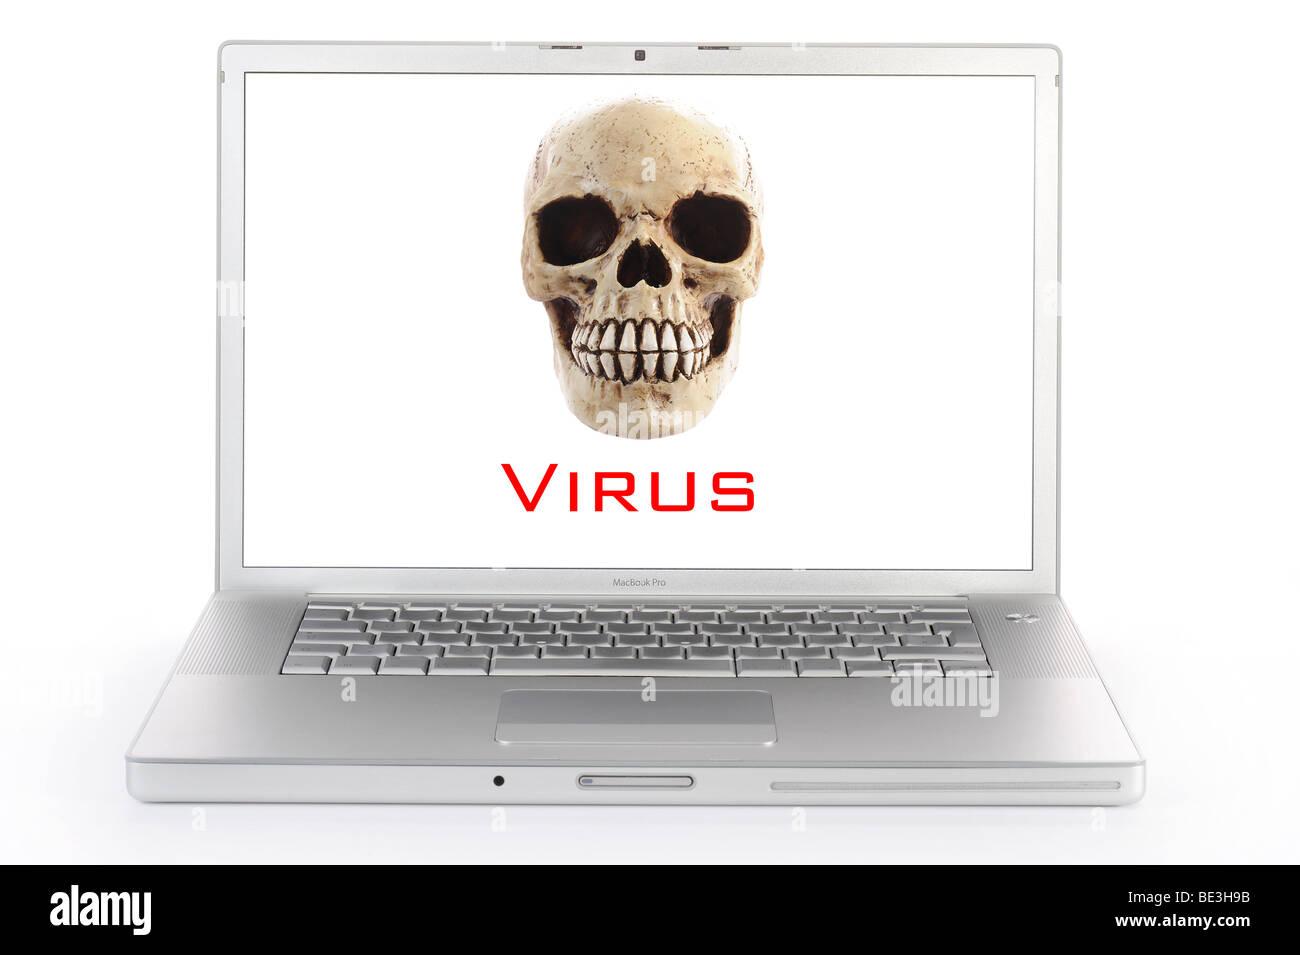 Skull on a computer screen, symbolic image for a virus Alert Stock Photo